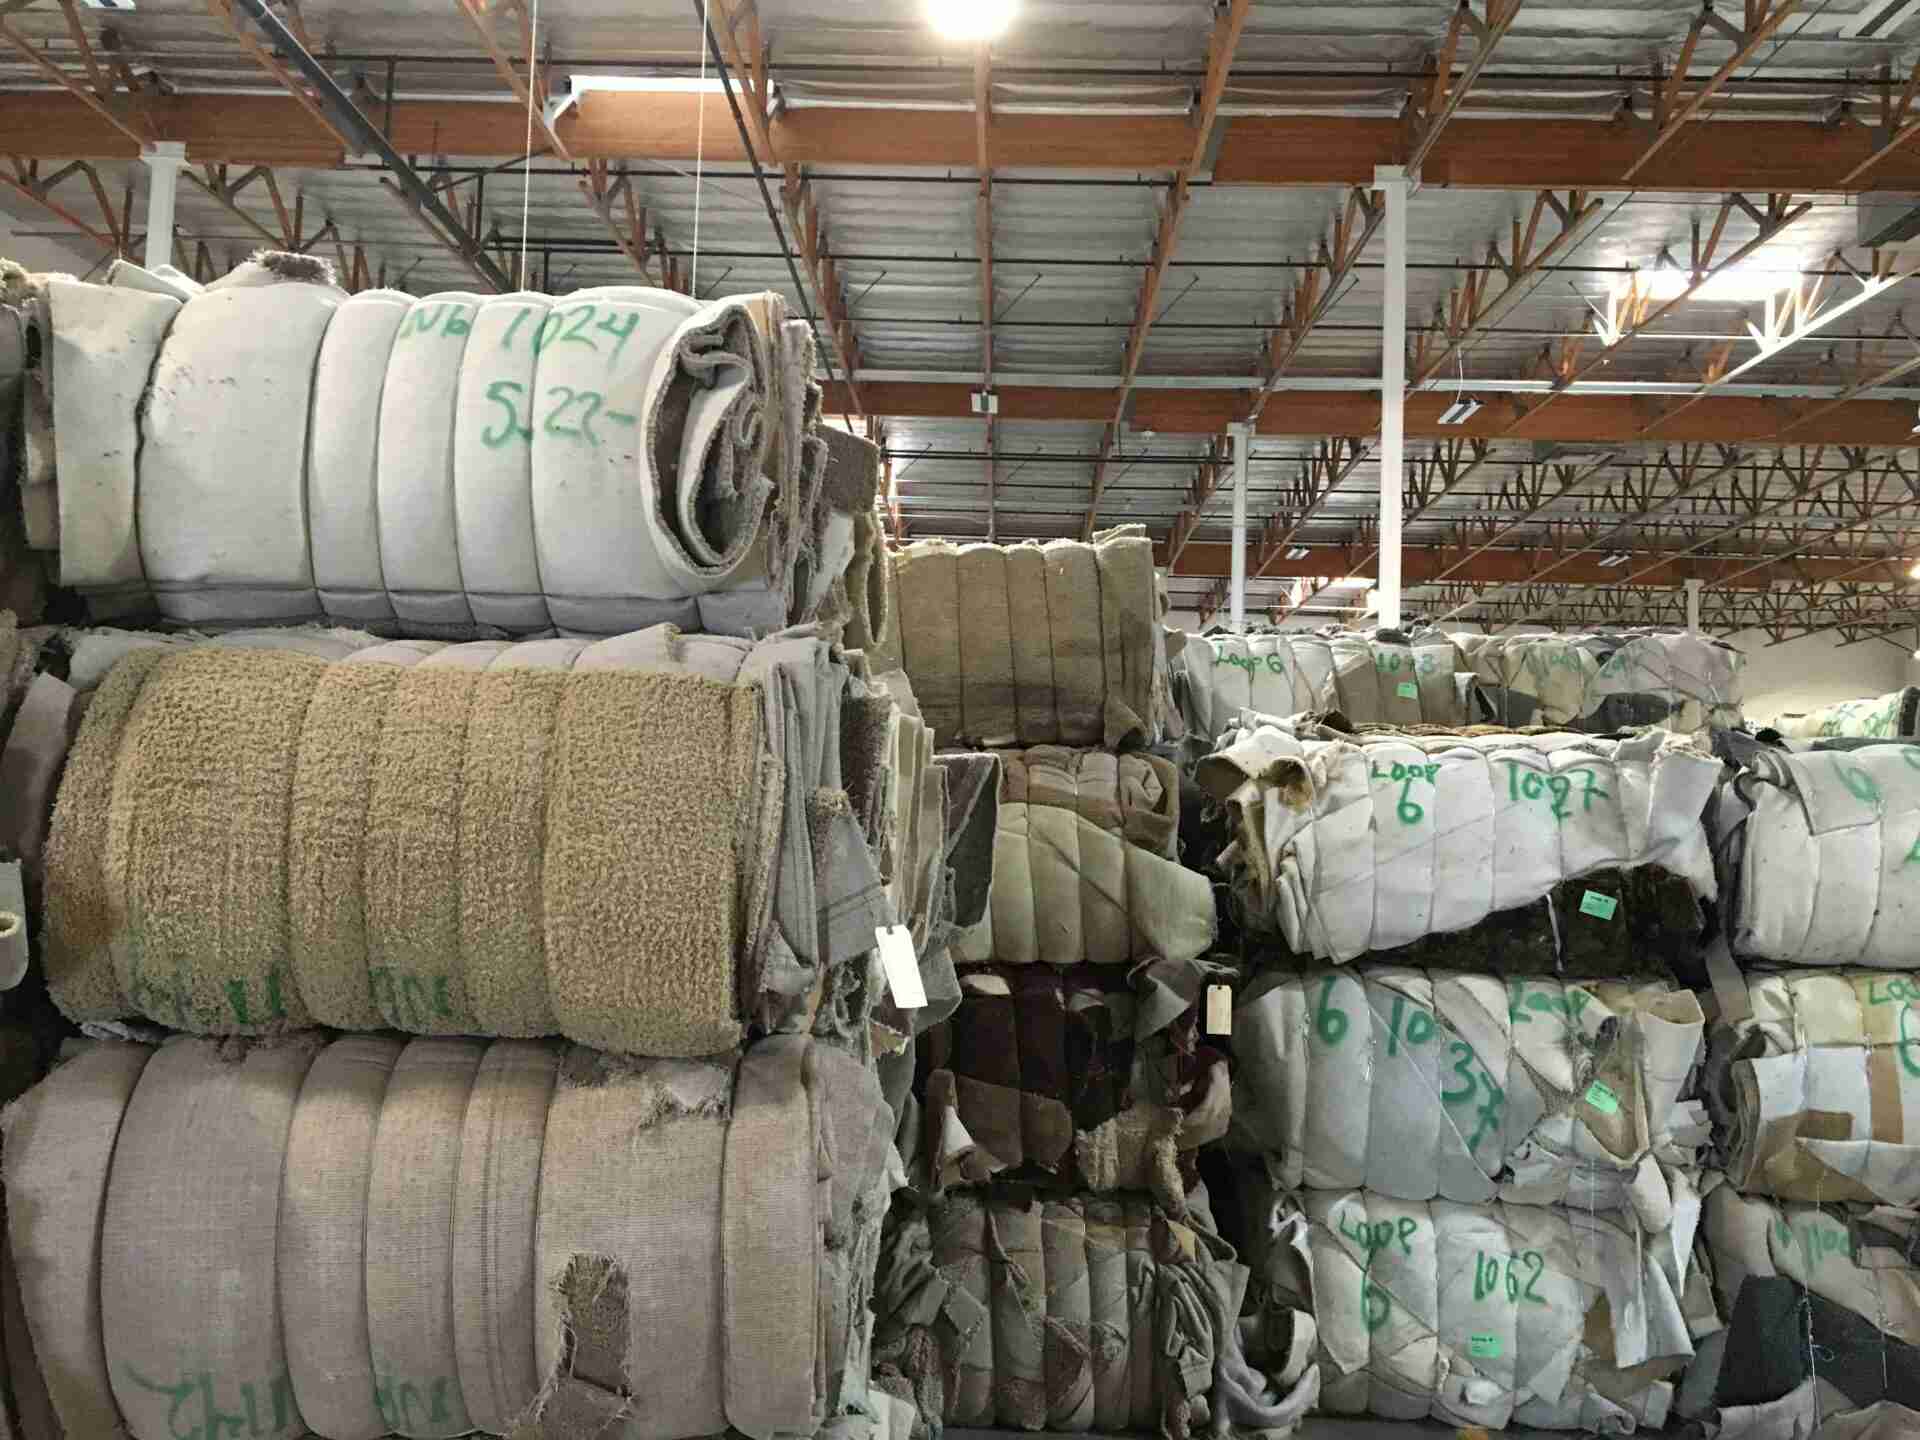 Closing The Loop In The Carpet Sector: Planet Recycling Inc. Will Join Aquafil To Strengthen Its Circular Economy Strategy